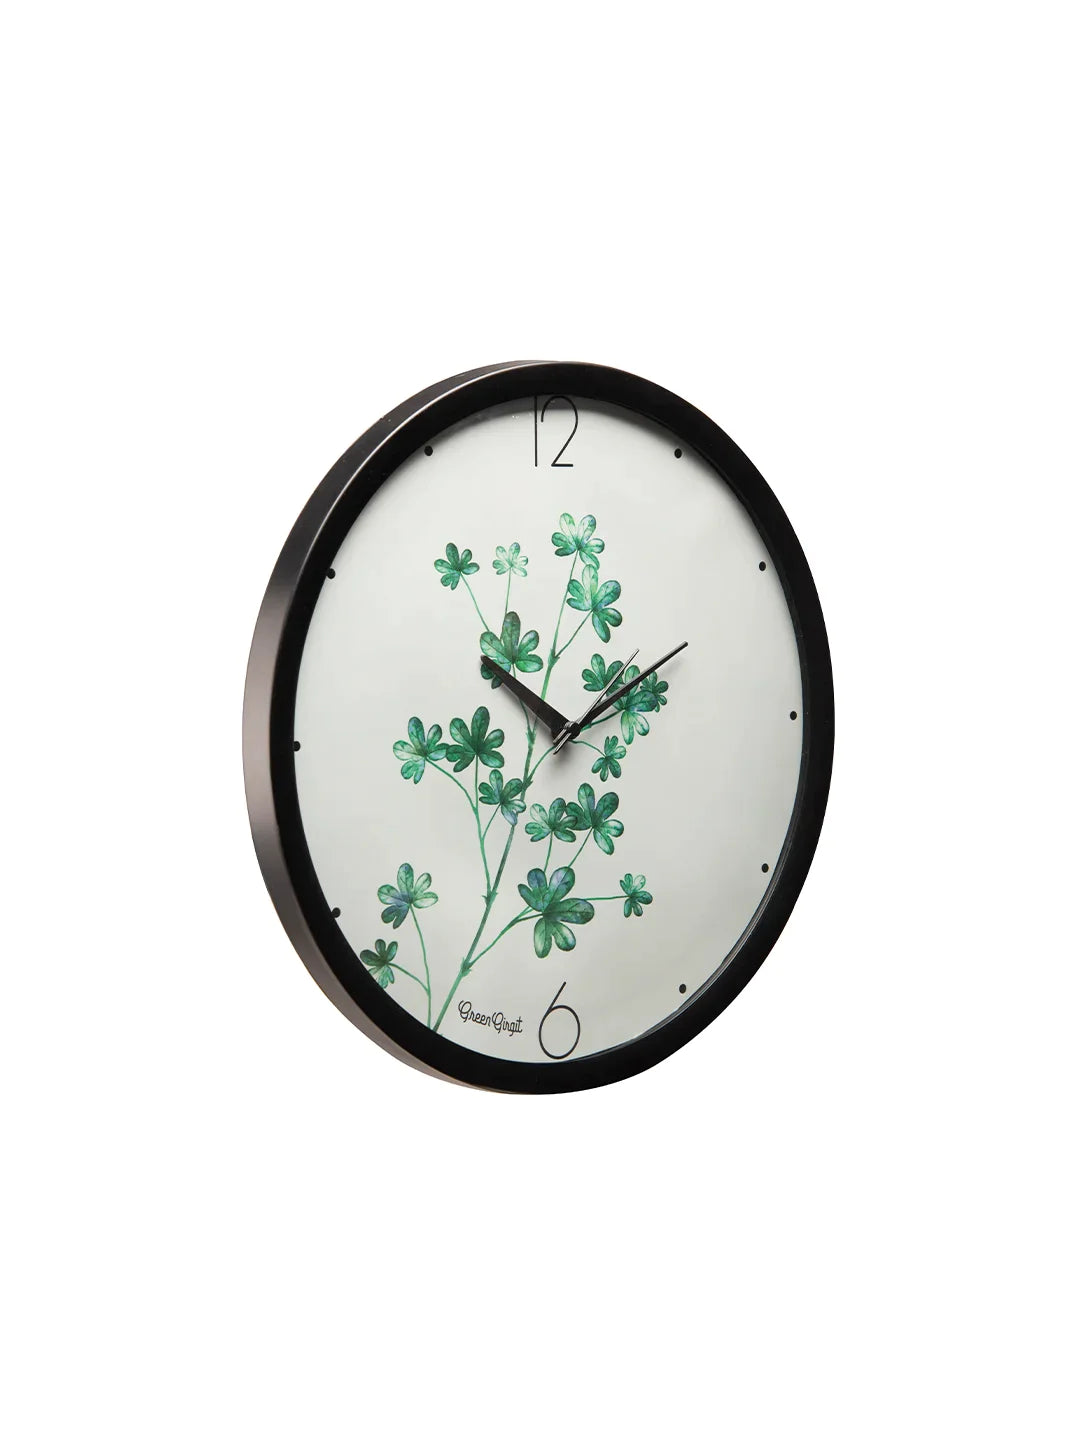 Green leaves Multicolor 13.5 Inch Plastic Analog Wall Clock